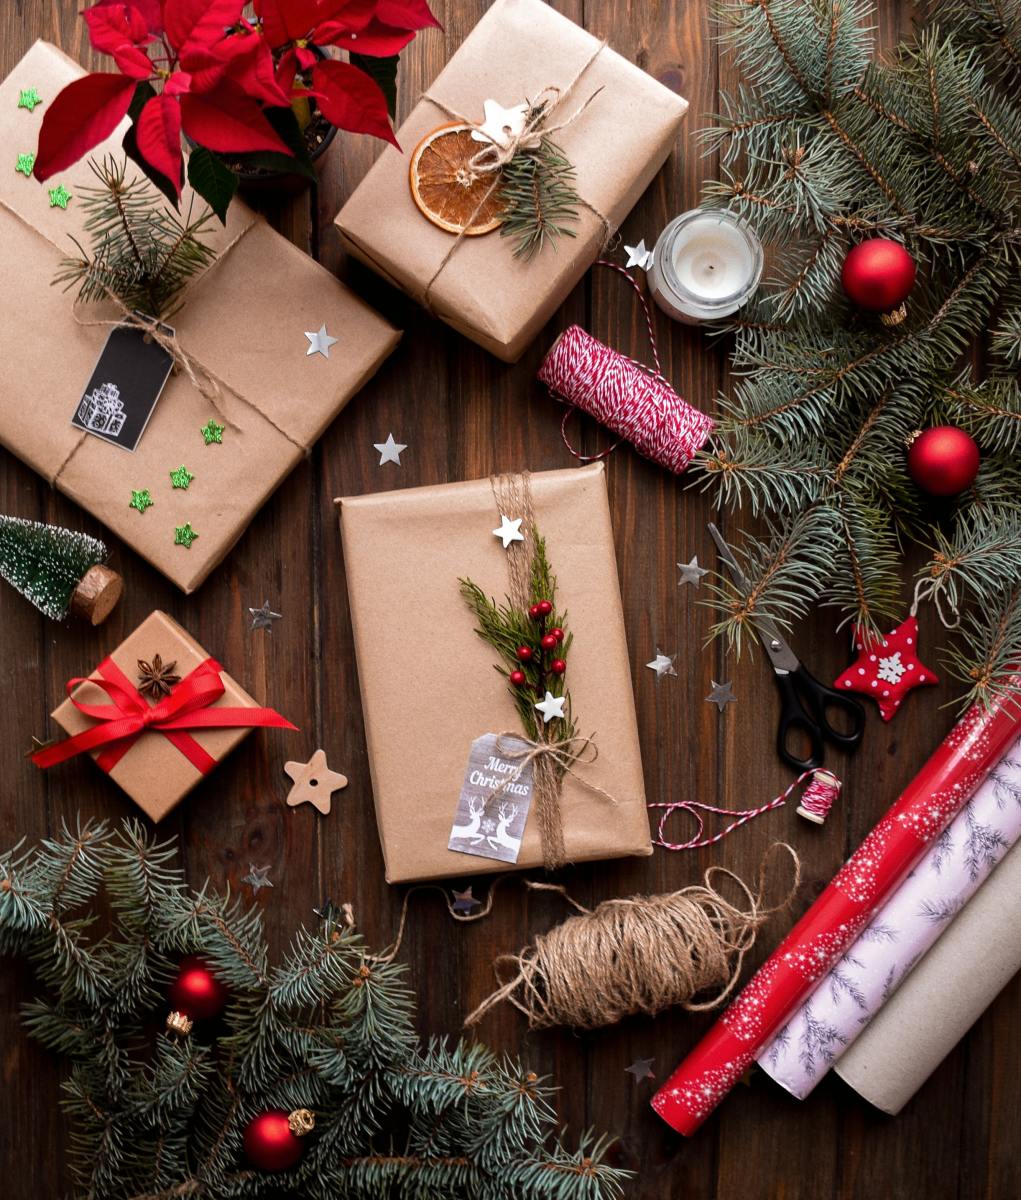 Learn how to cut back on your Christmas expenses.